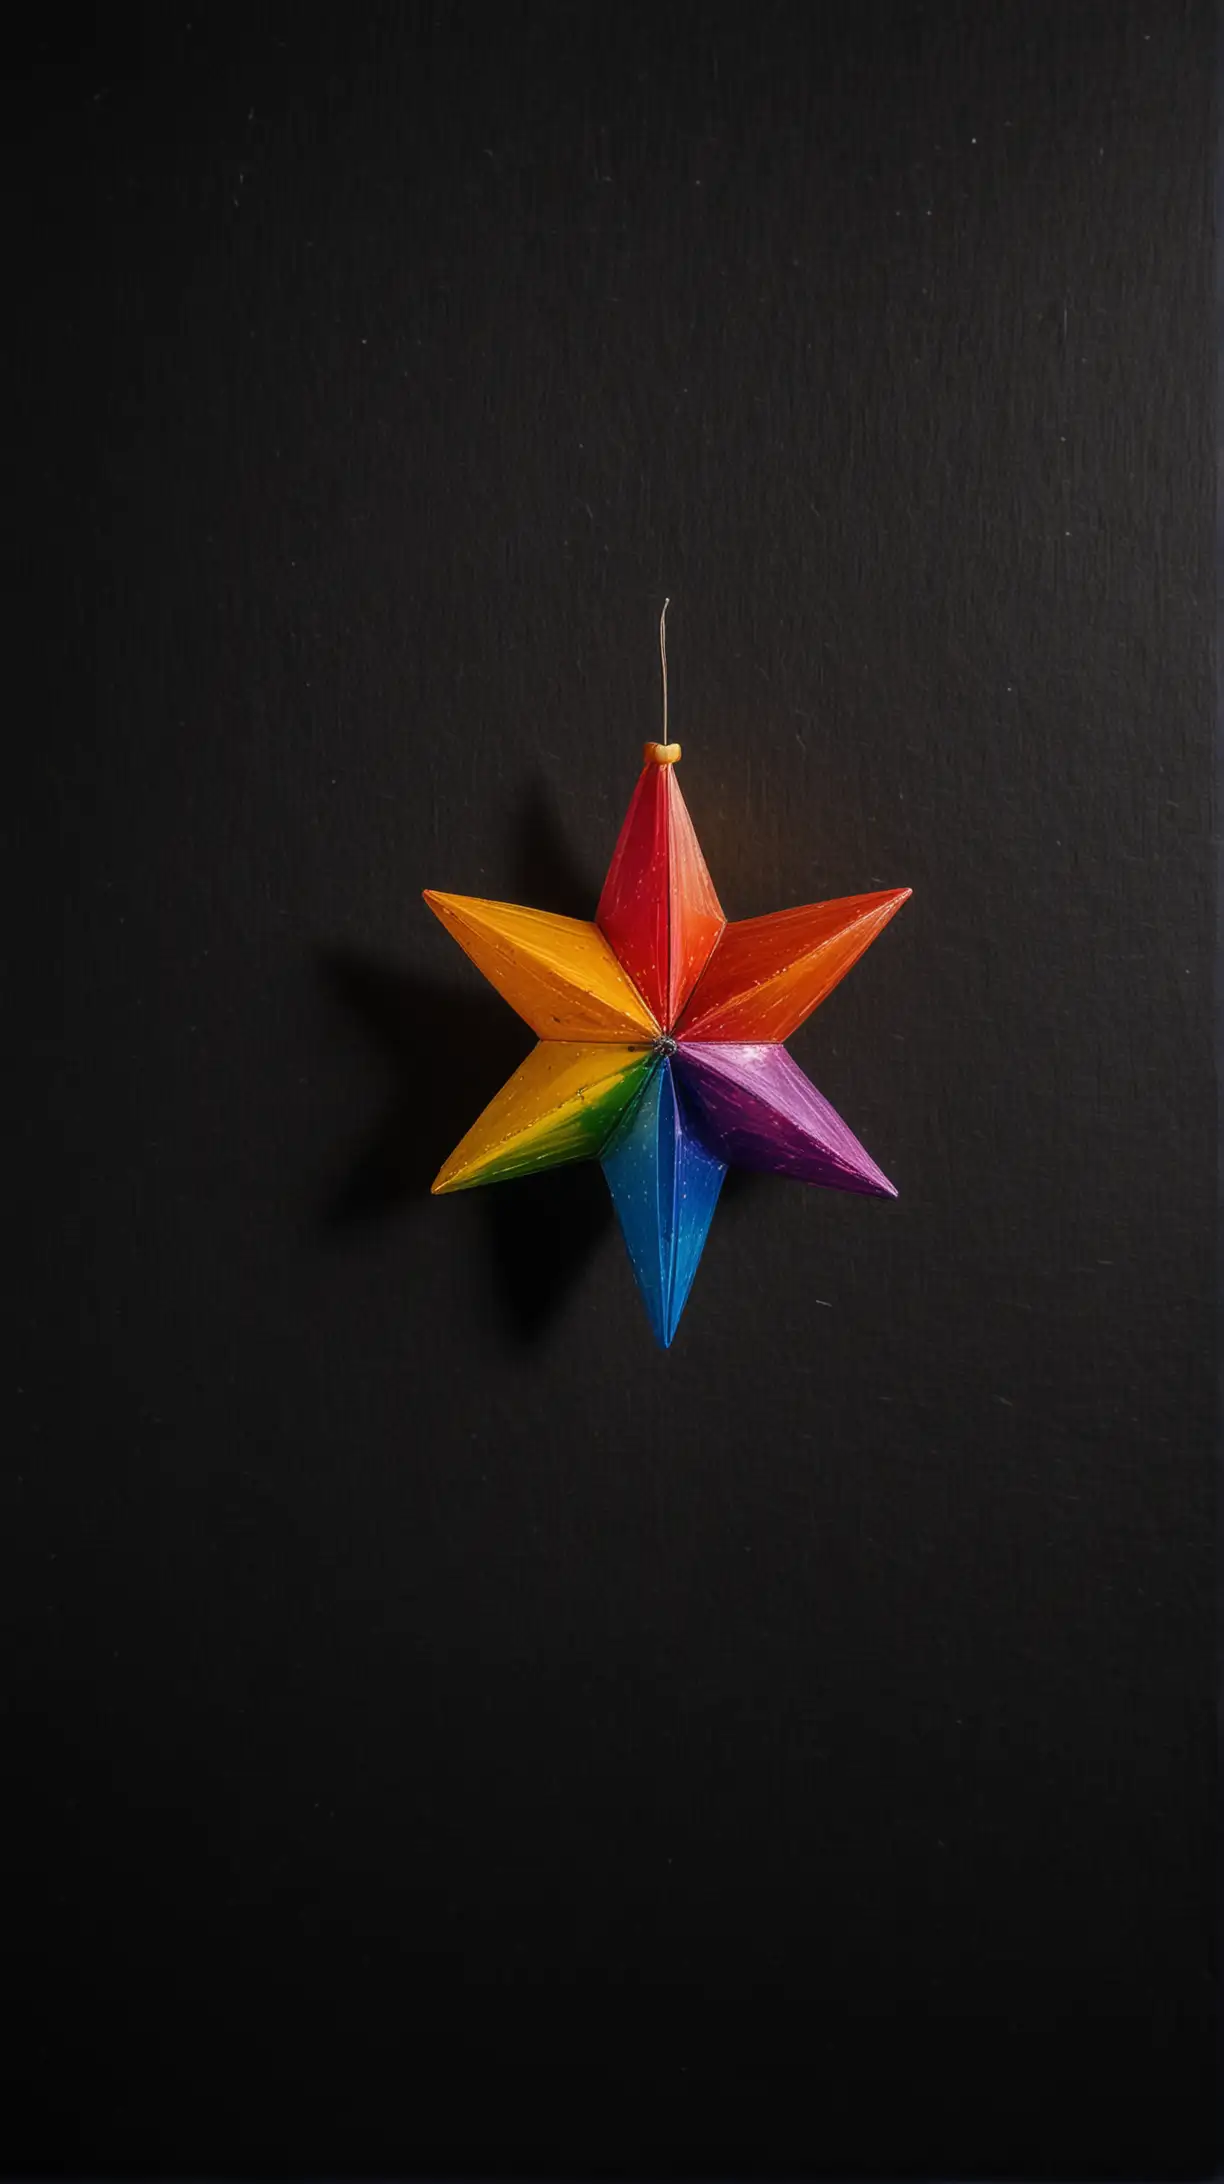 Spinning Star Shape Rainbow Spinning Top on Black background